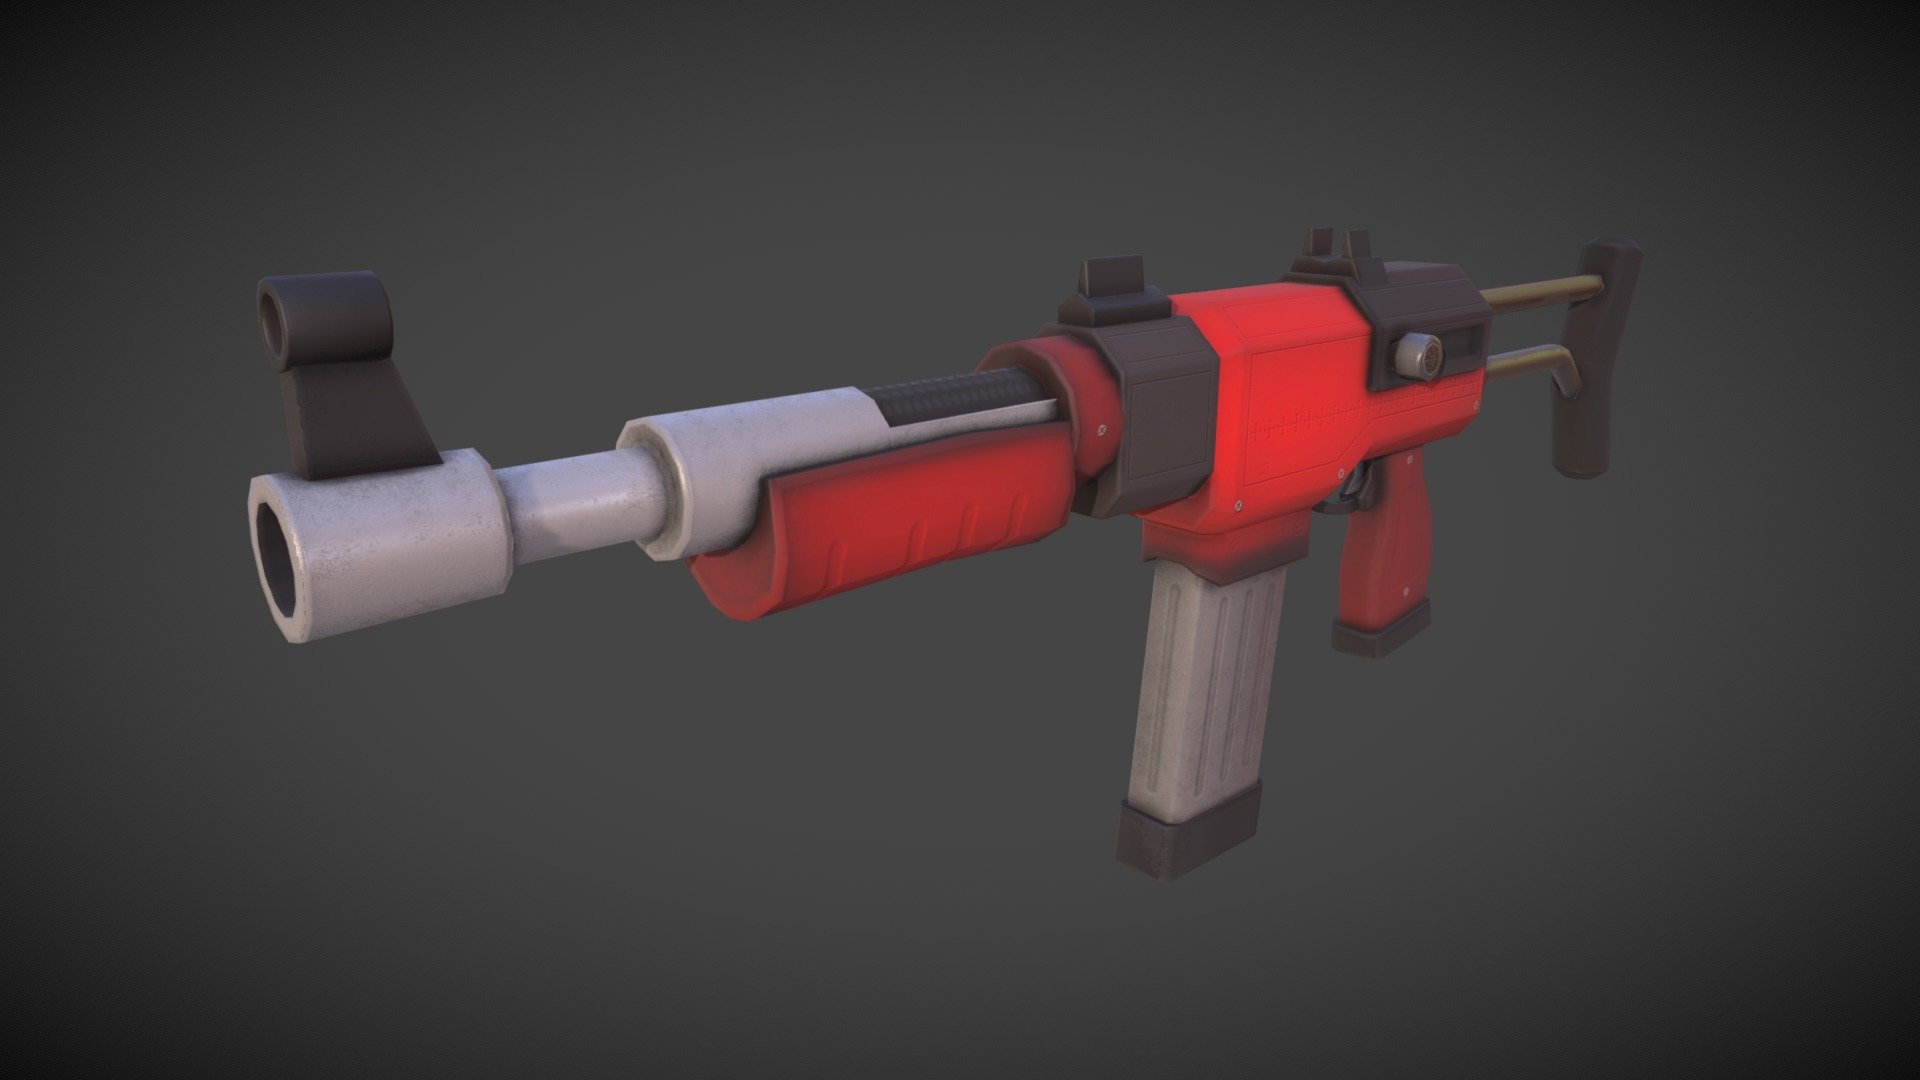 Modeled in blender, painted in substance painter, referenced from https://sketchfab.com/3d-models/stylized-rifle-lowpoly-cartoon-gun-f1ee67209b5d4caaa3a71ac809980365 - Low poly stylized gun - 3D model by Xenthera 3d model